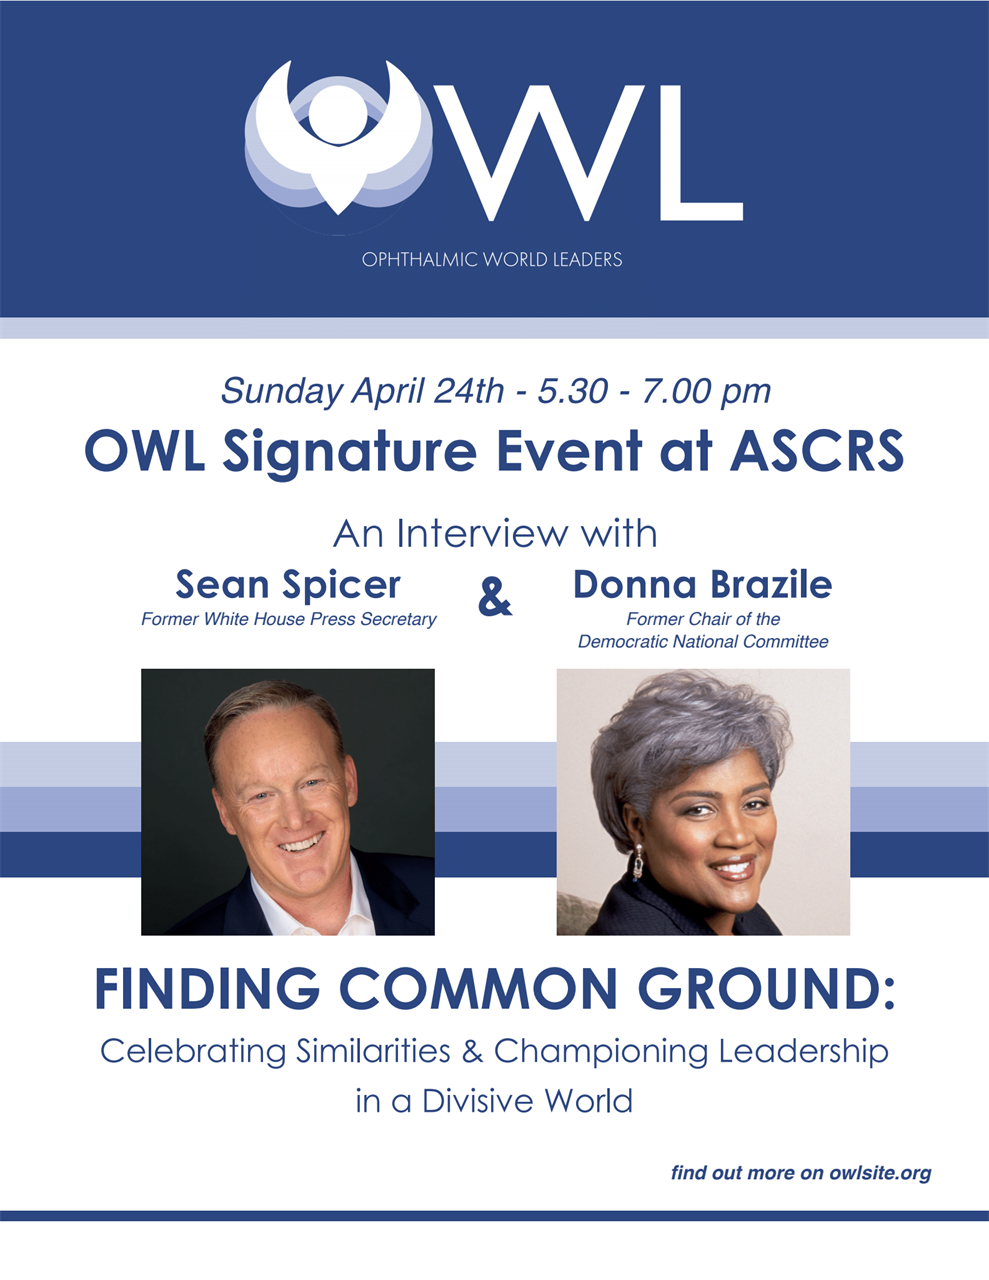 OWL Signature Event at ASCRS 2022; Sunday, April 24, 2022, 5:30-7 PM ET. An Interview with Sean Spicer & Donna Brazile. Finding Common Ground: Celebrating Similarities & Championing Leadership in a Divisive World